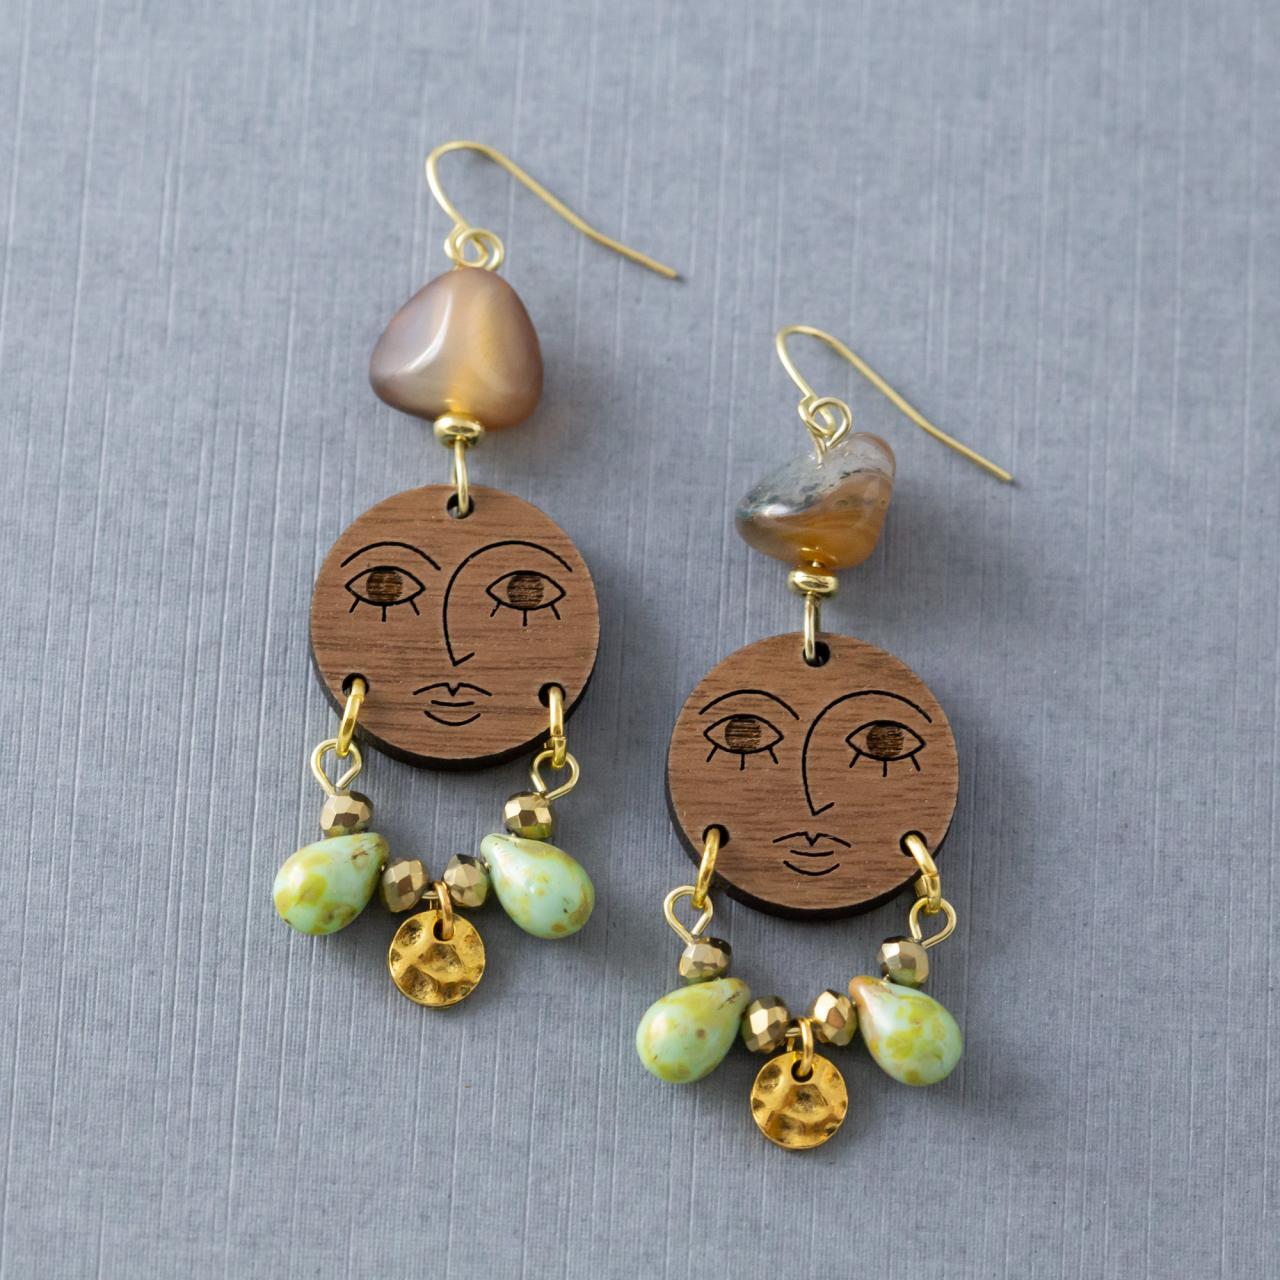 Wood Face Earrings, Face Jewelry, Moon Face Earrings, Statement Earrings, Artistic Earrings, Artsy Jewelry